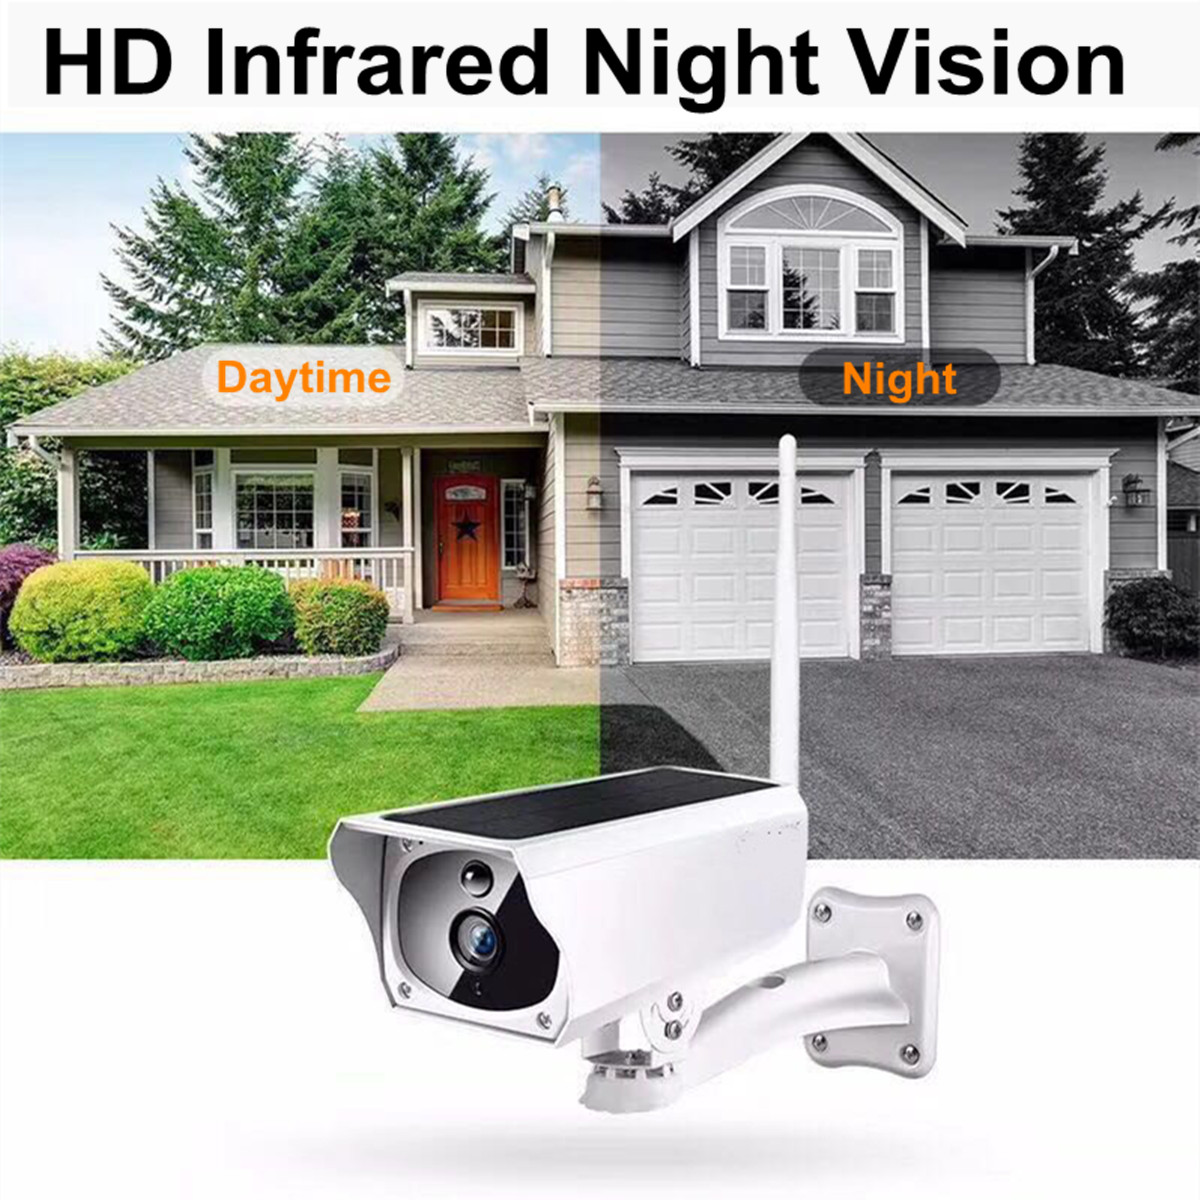 Solar Powered Wireless WIFI IP Camera 1080P HD Infrared Night Vision Waterproof Security Surveillance CCTV Dual Power Supply Long Standby 17